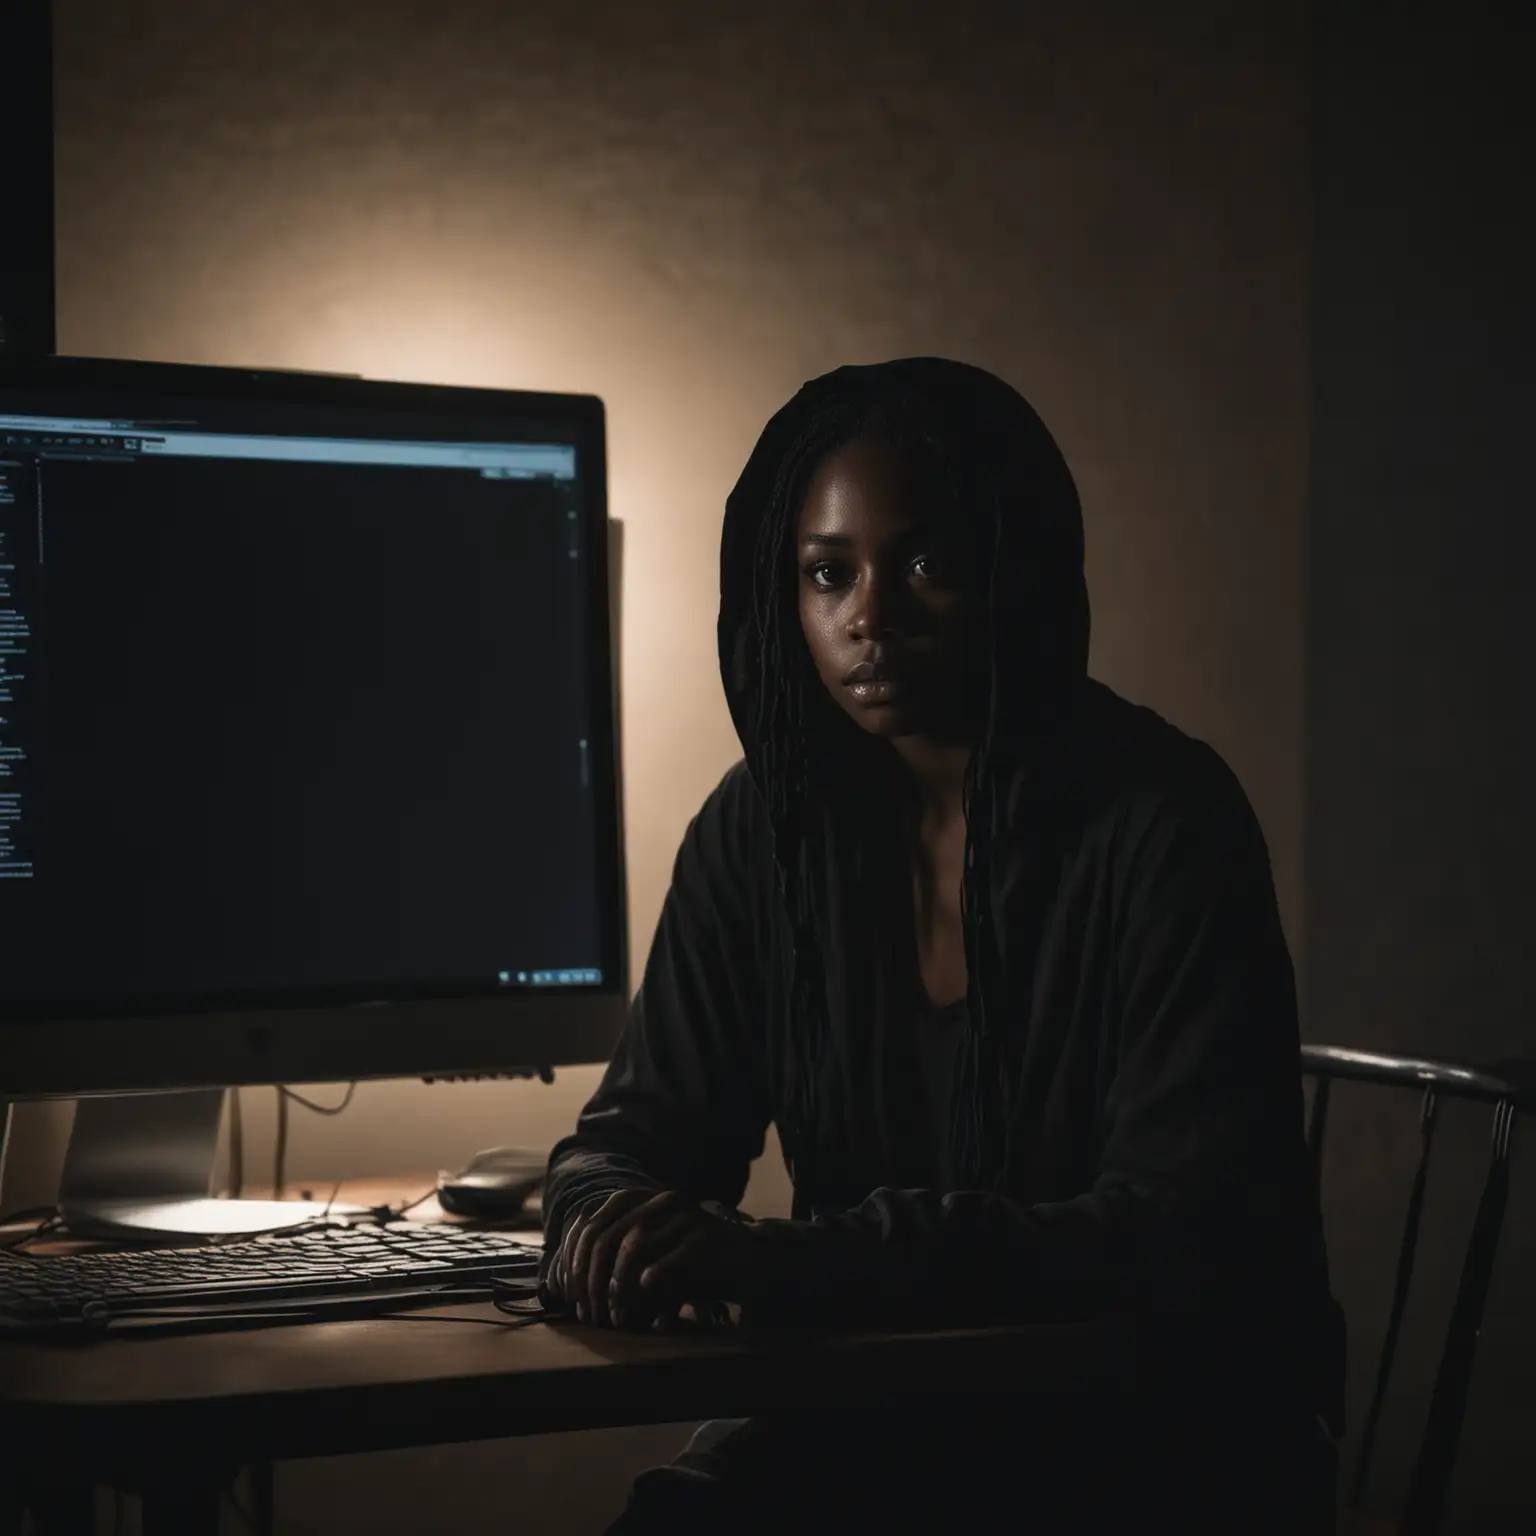 A mysterious young black woman shrouded in black sitting in front of a computer screen in a dimly lit room. The mood is sinister.